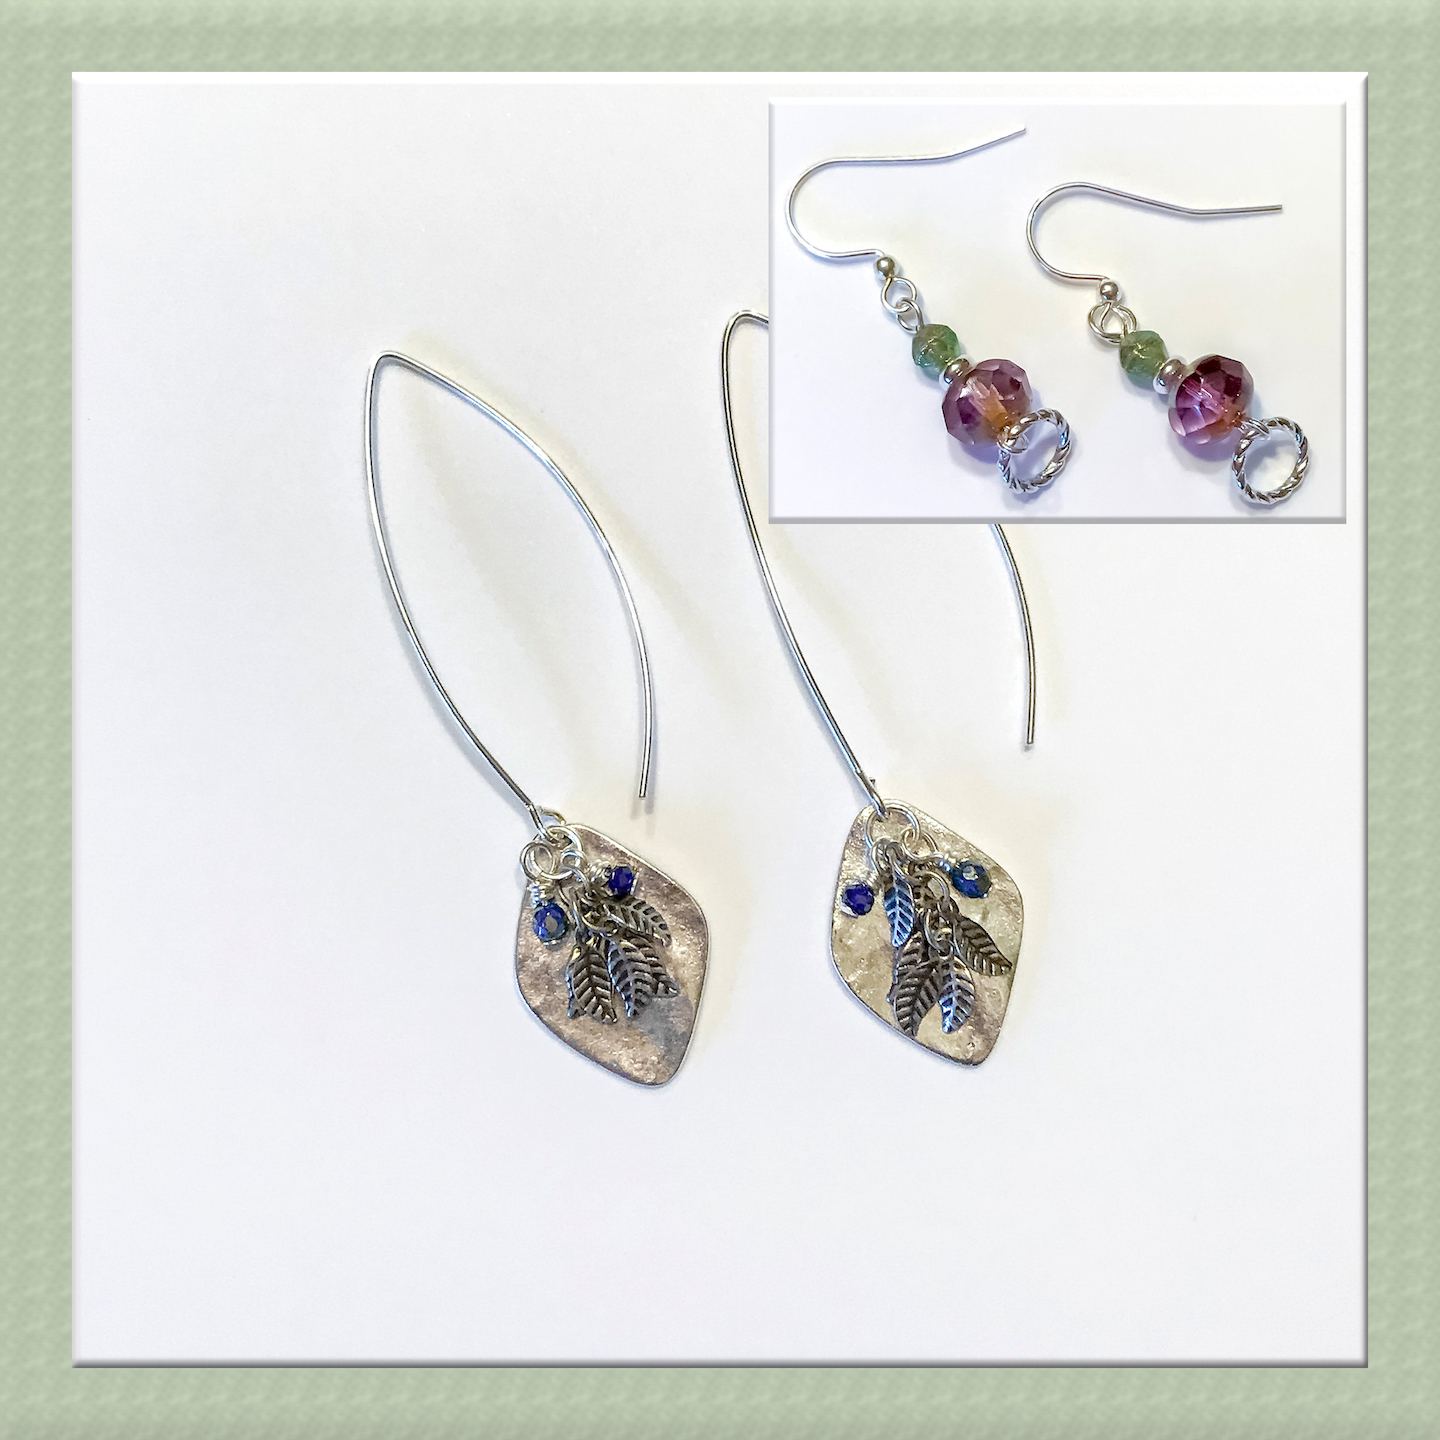 Celebration Day Earrings for Sip and Bead Series at Casa Larga Vineyards